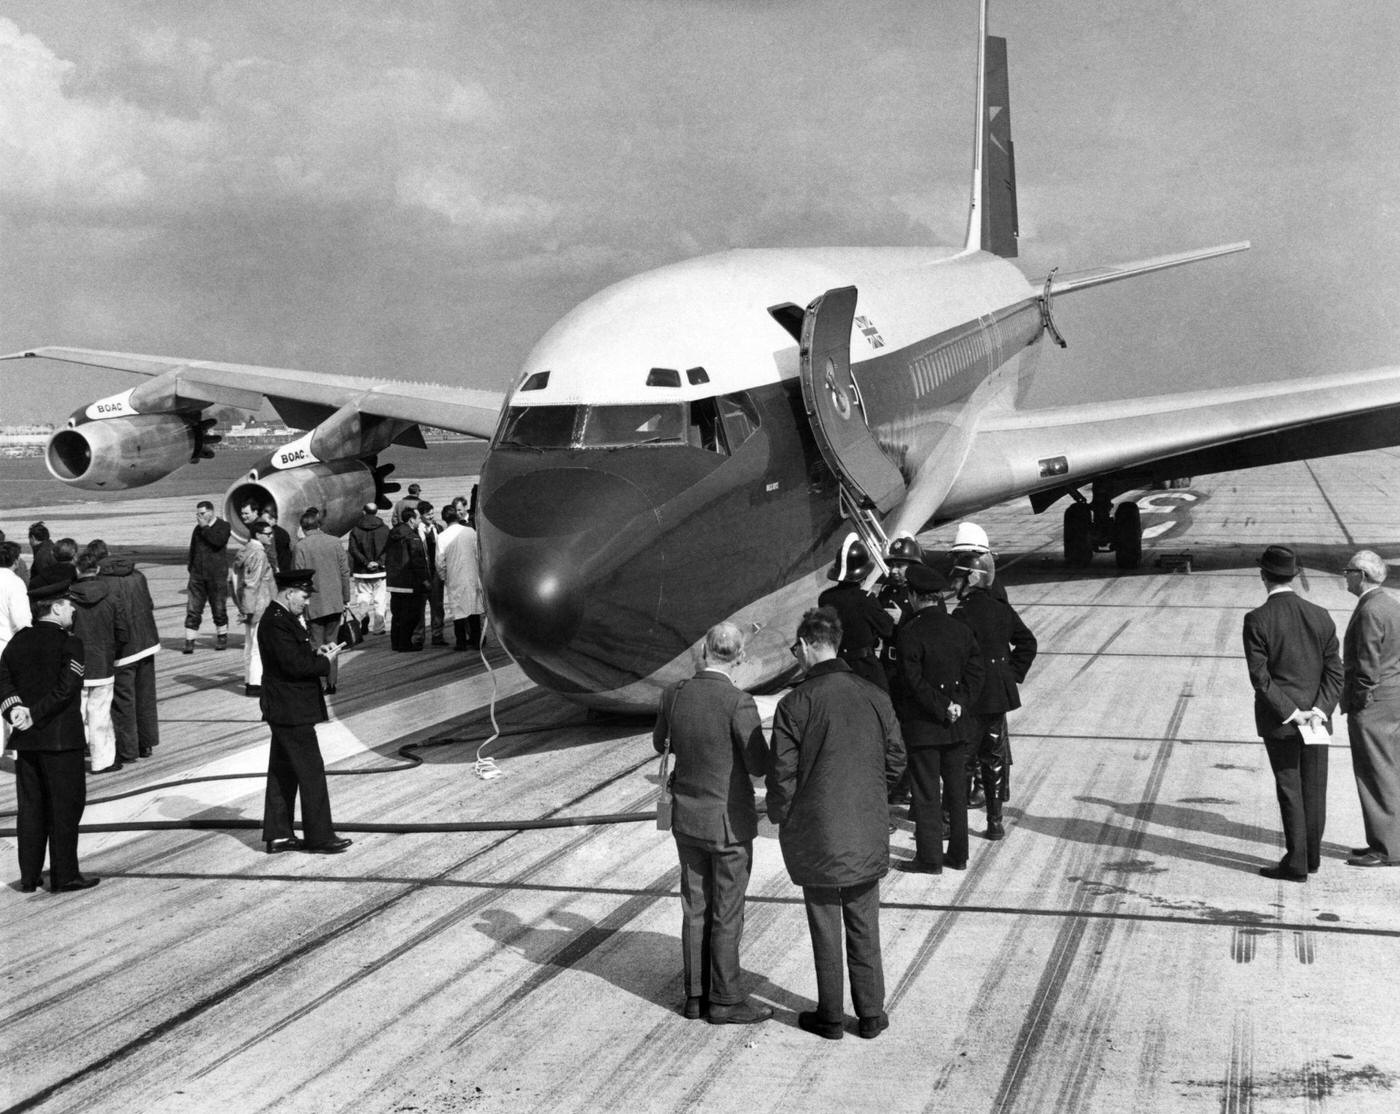 Emergency landing of a Boeing 707 at Heathrow Airport. April 1967.